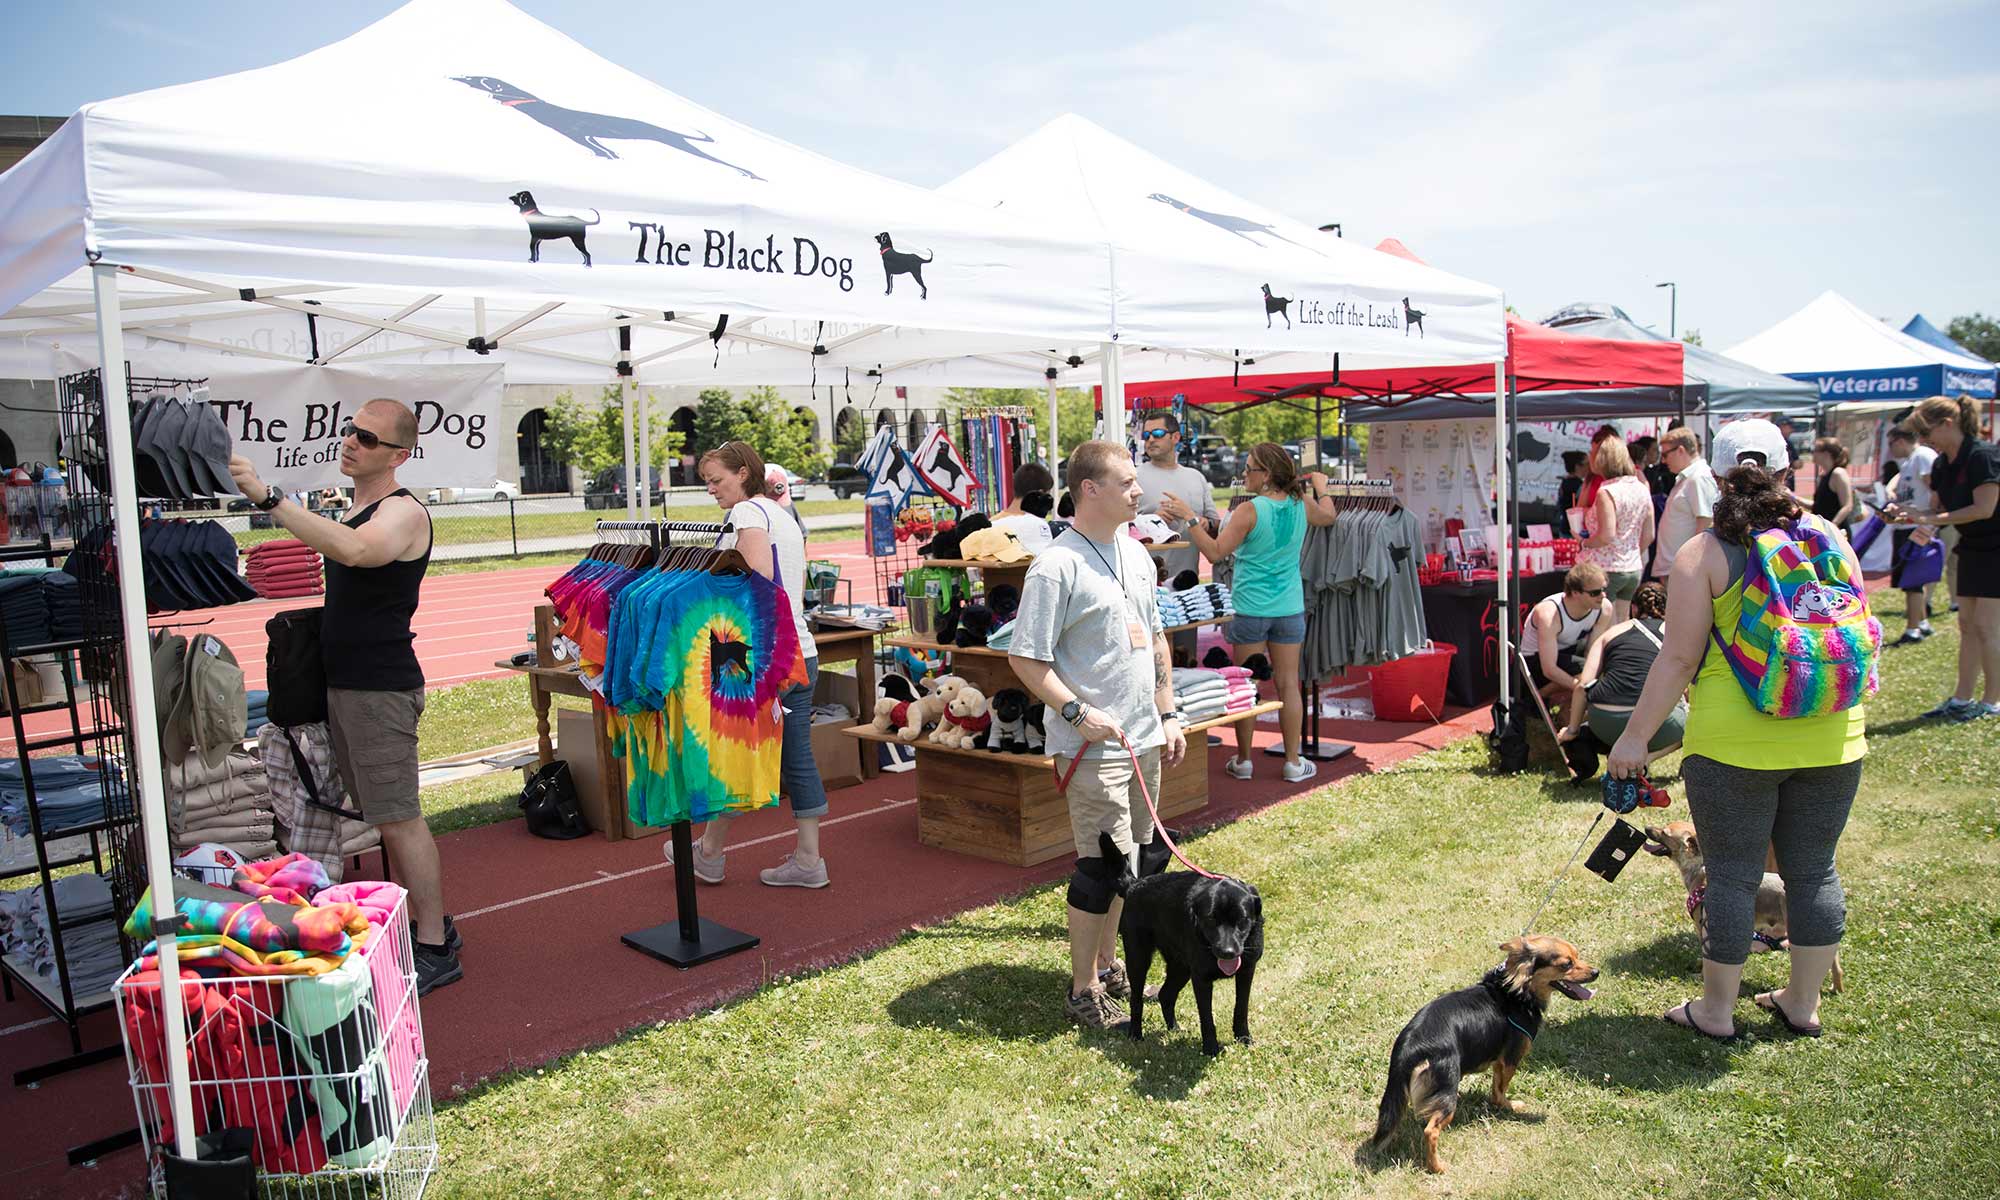 WOOFstock event photography showing The Black Dog tents with merchandise